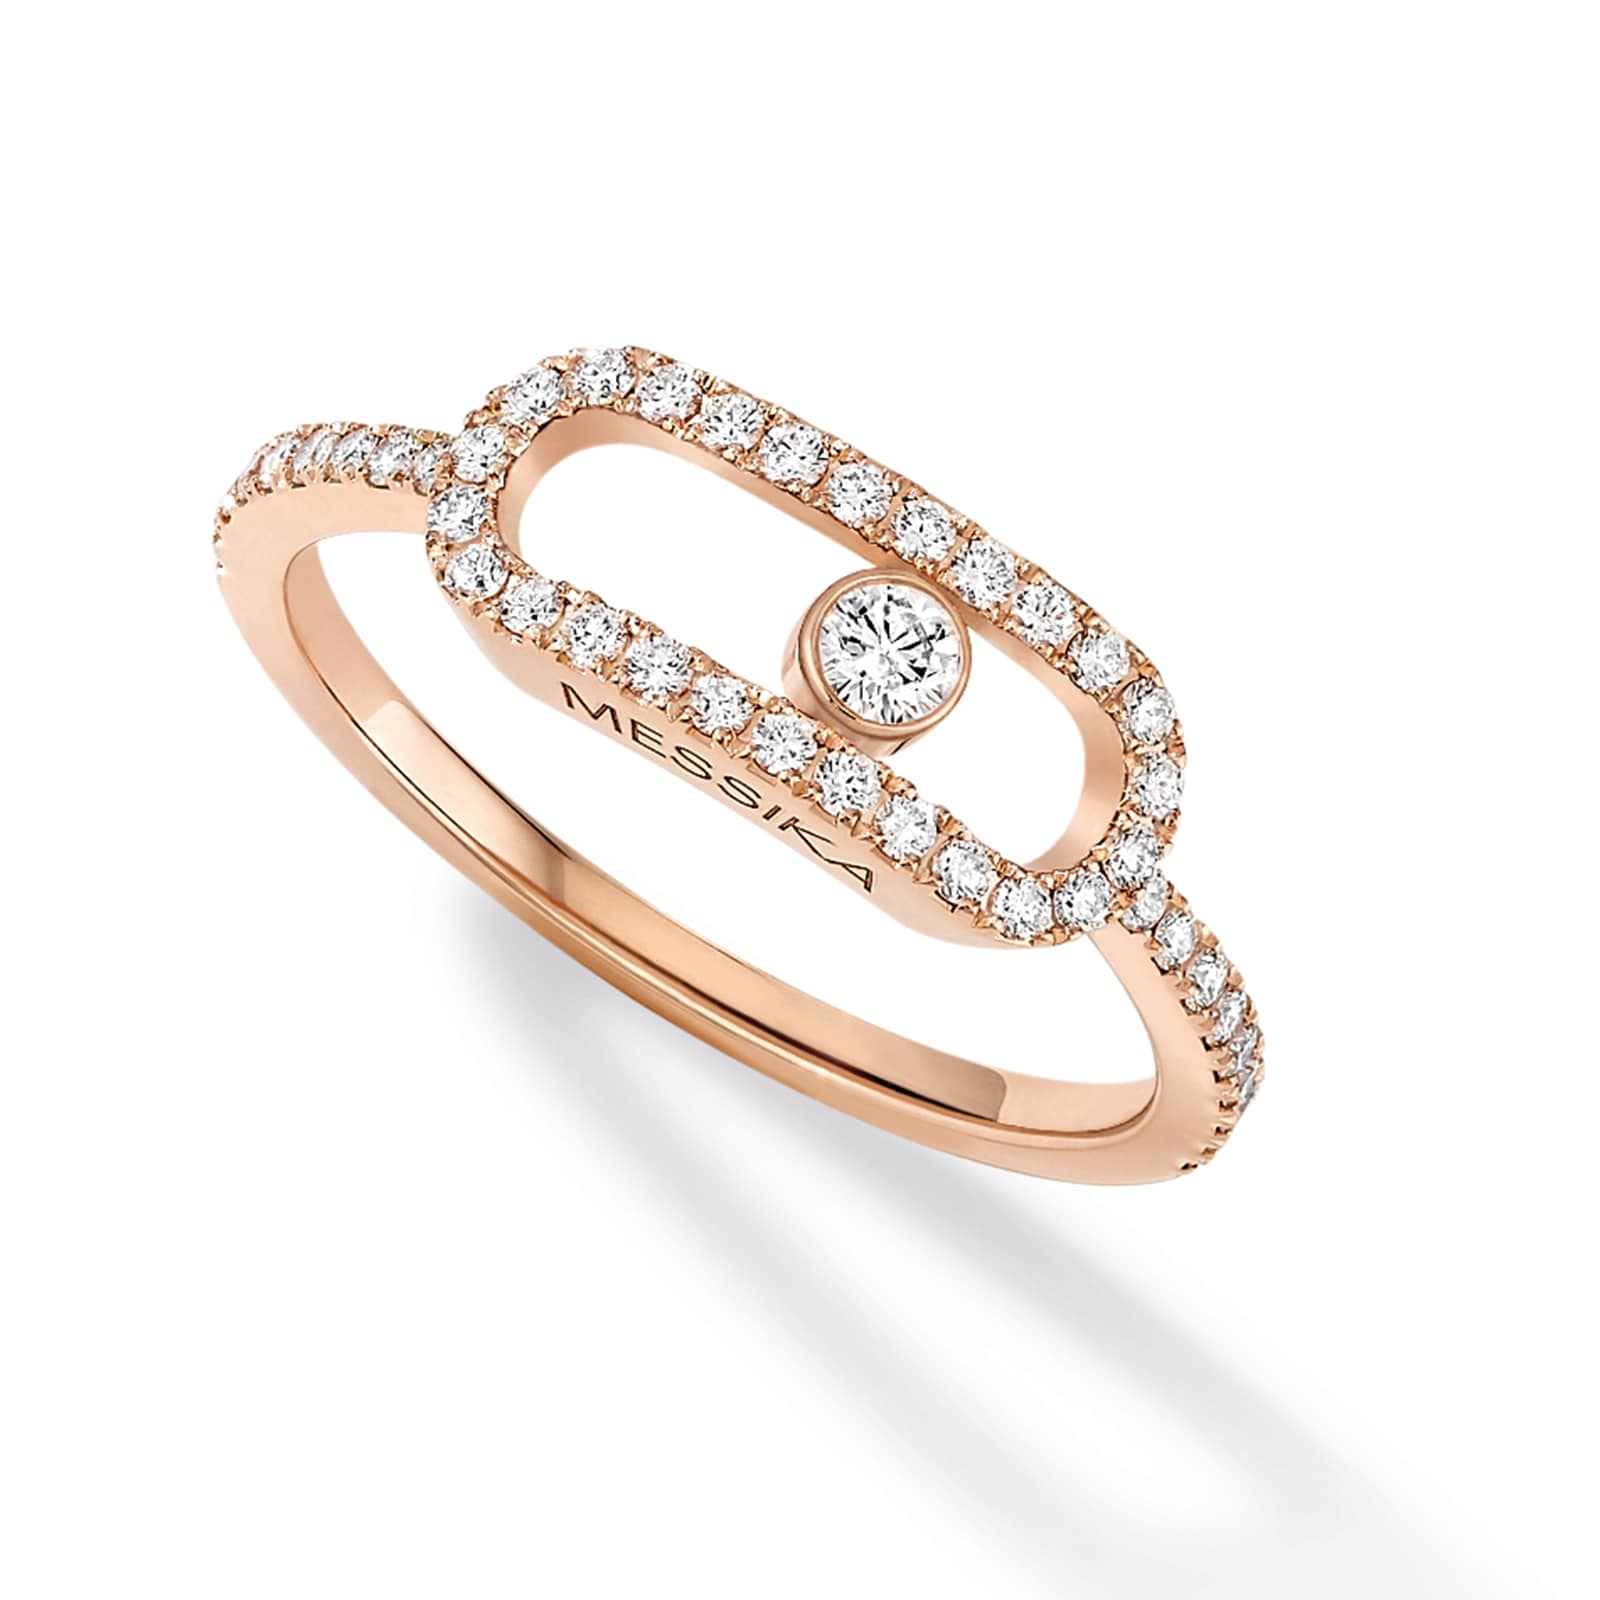 Messika 18k Rose | Ring 6.75 Gold Mayors Uno 12113-PG-54 0.31cttw Move Diamond Size